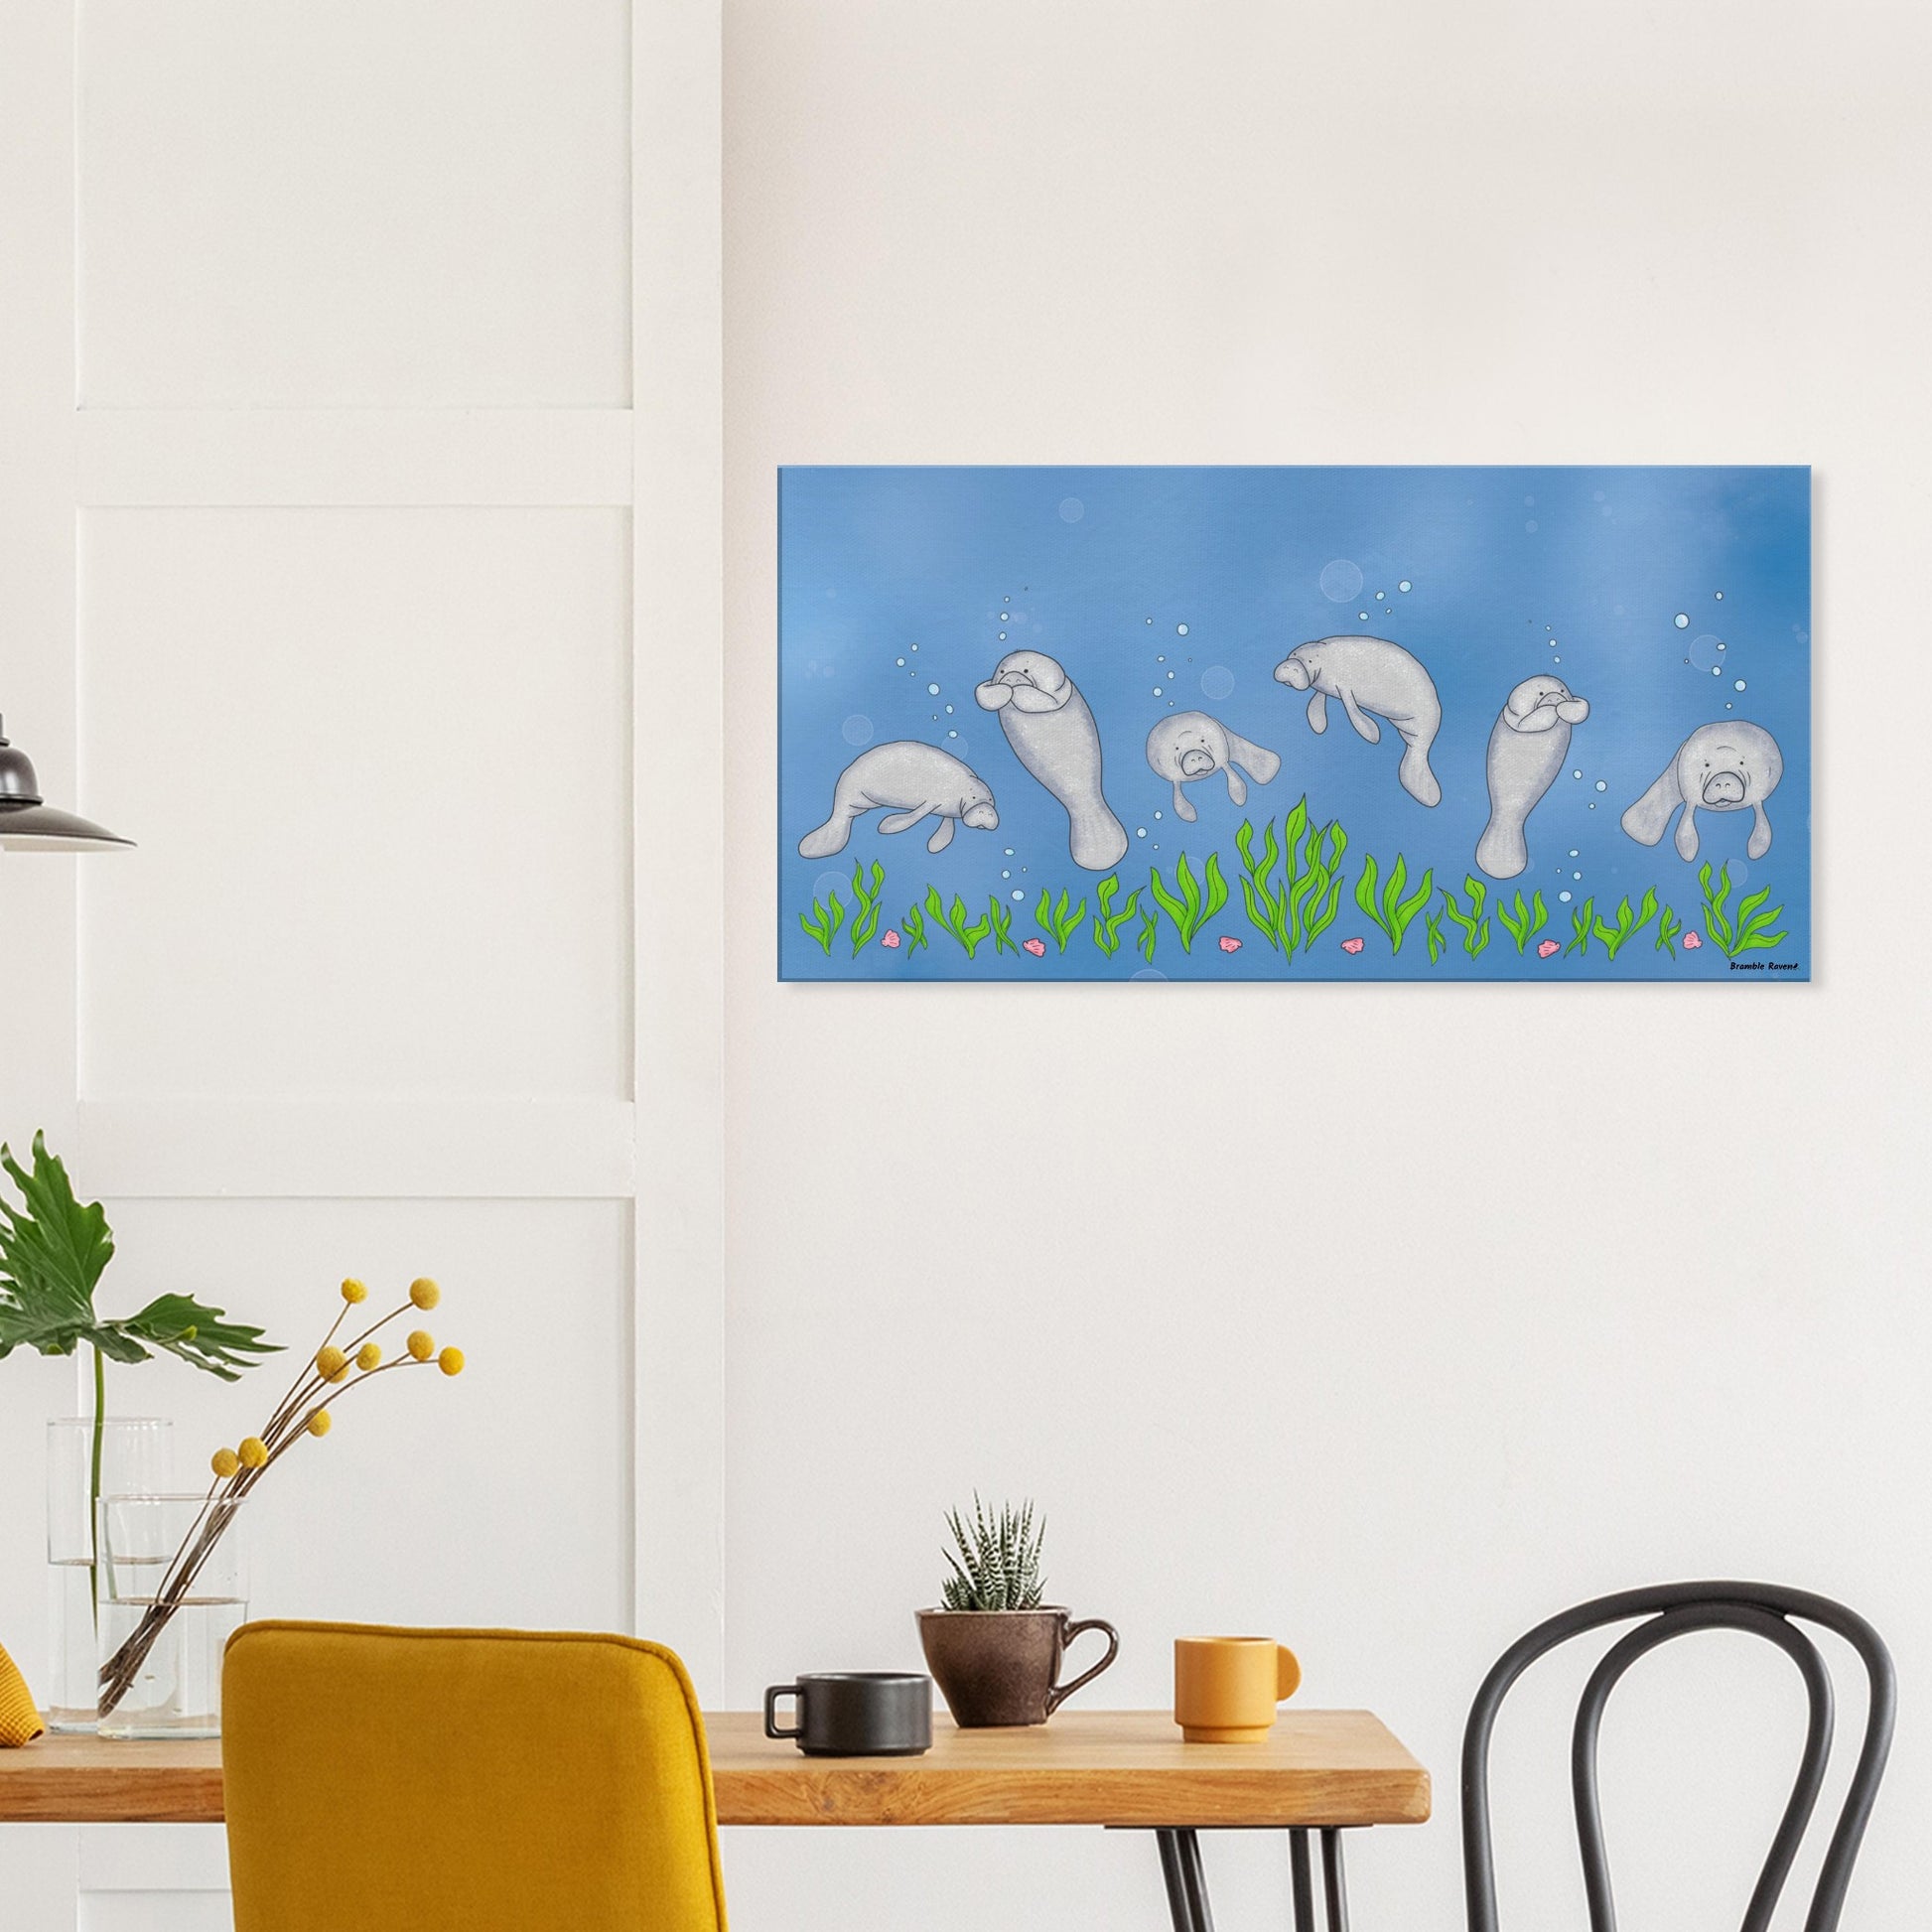 20 by 40 inch slim canvas wall art print featuring cute illustrated manatees swimming above the seabed. Shown on wall above wooden kitchen table with cups and chairs.